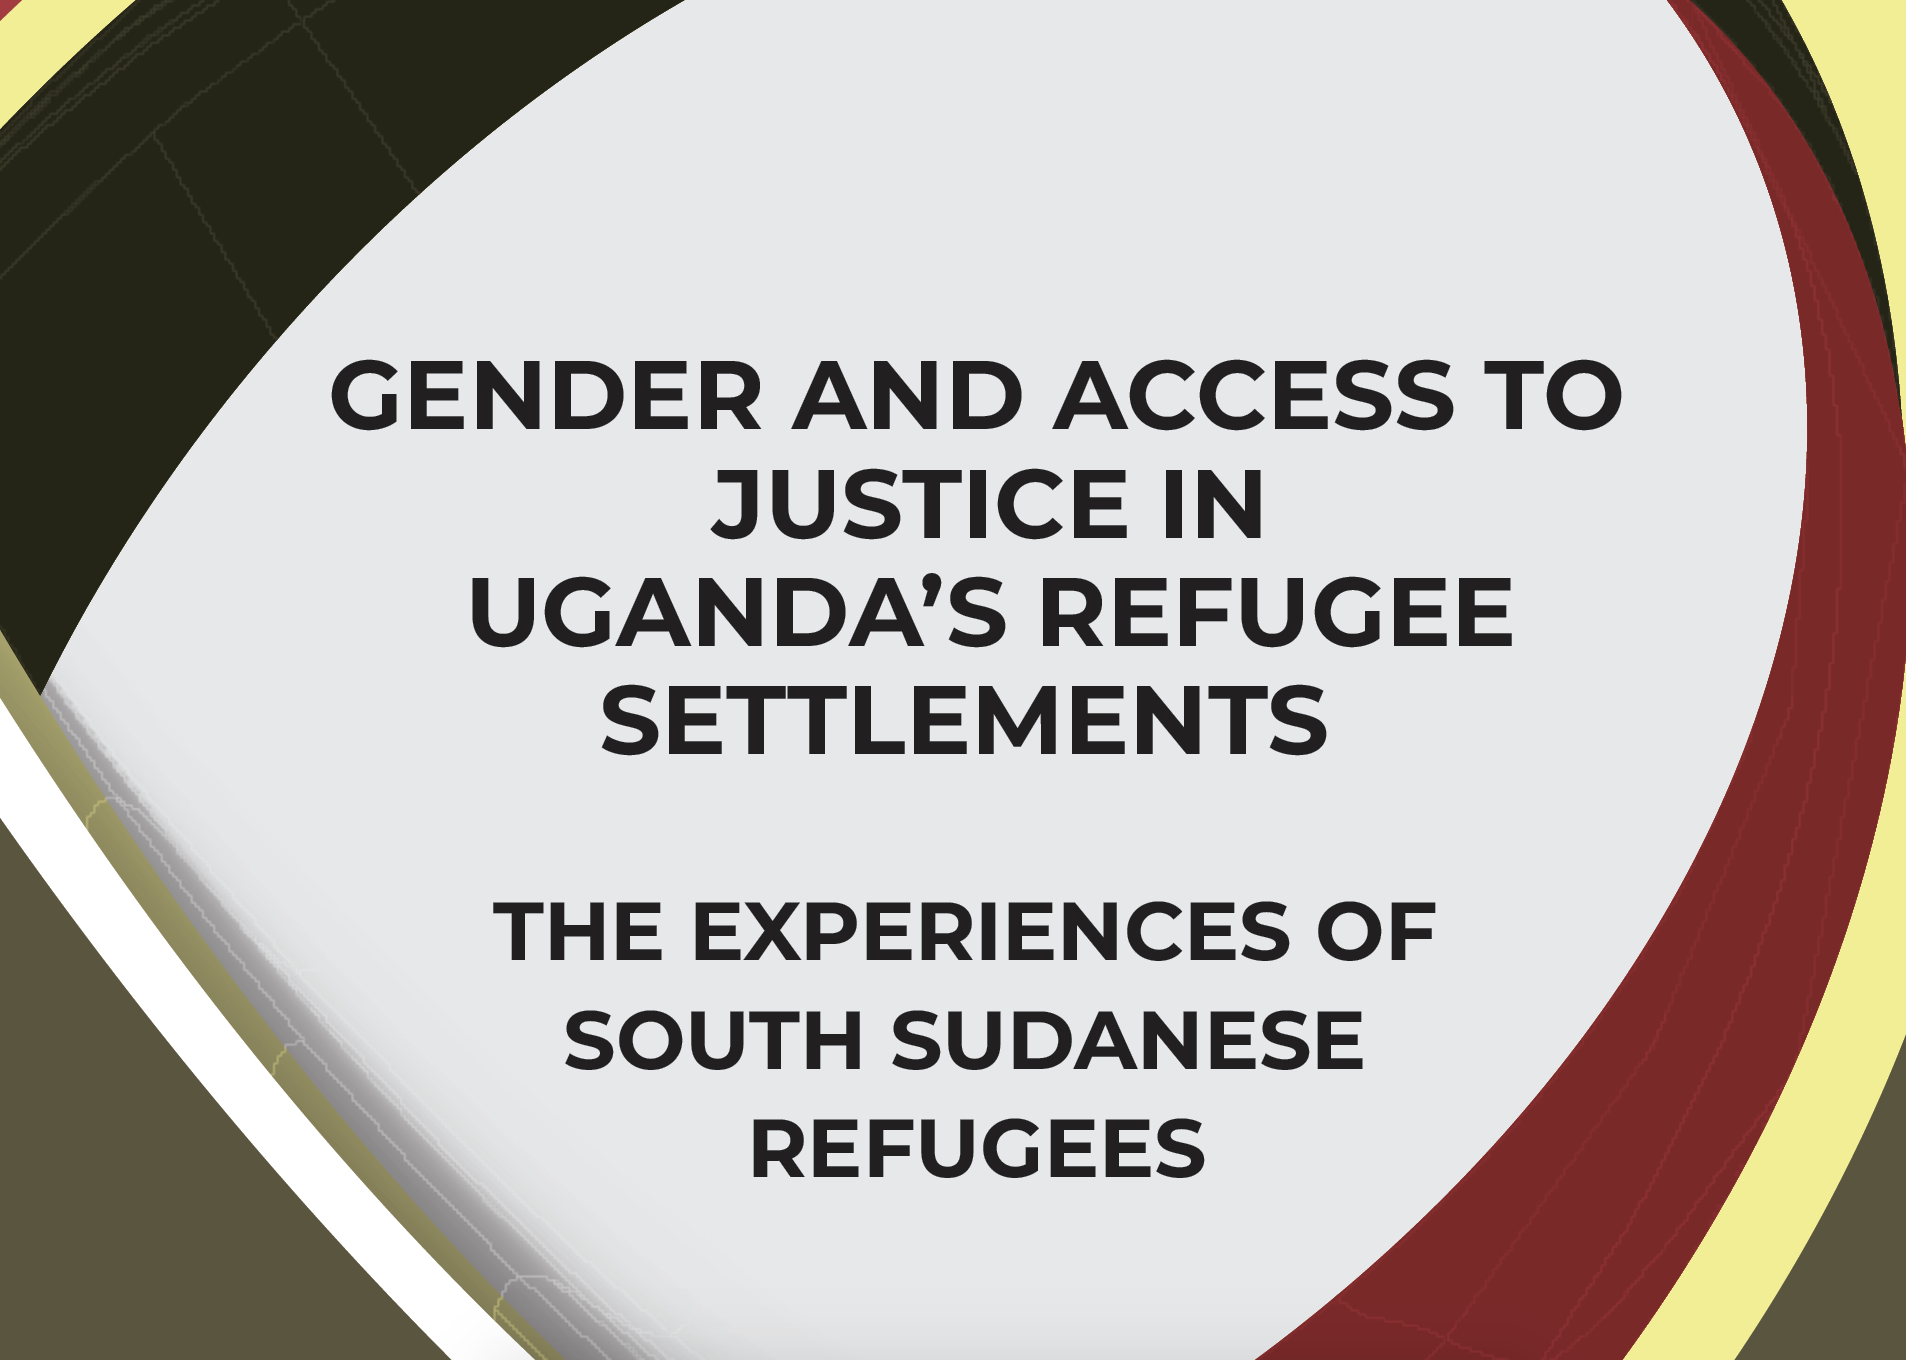 Gender and Access to Justice in Uganda’s Refugee Settlements